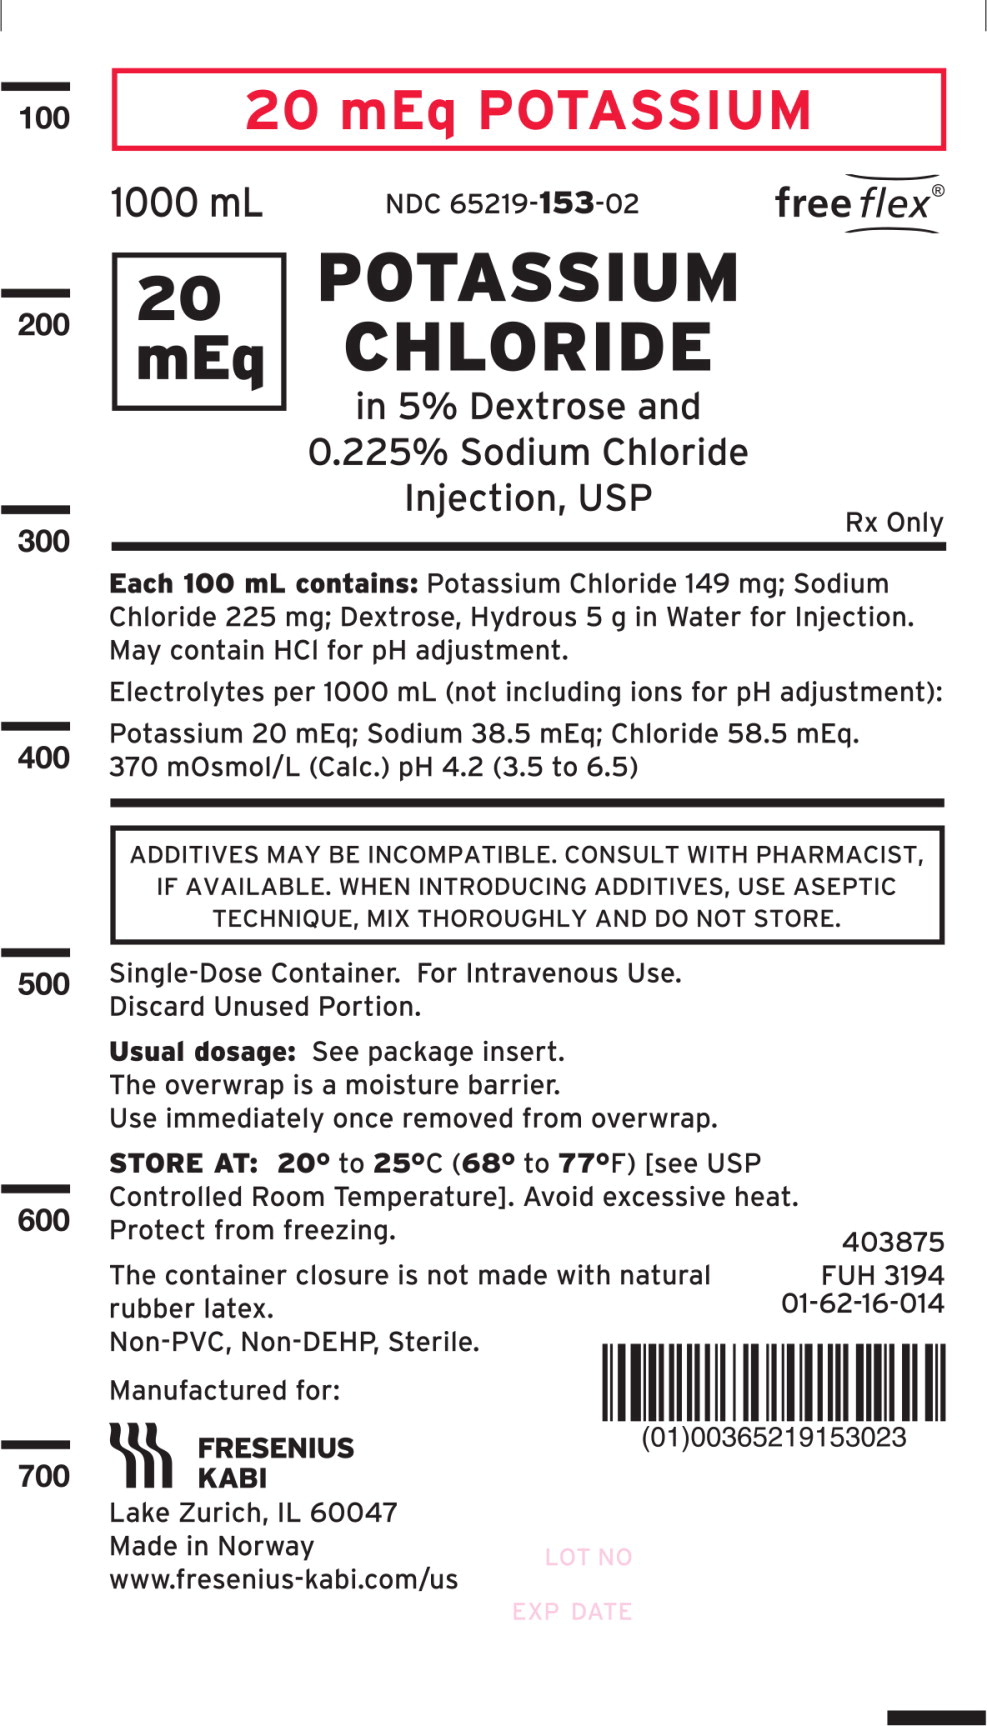 PACKAGE LABEL - PRINCIPAL DISPLAY –Potassium Chloride in 5% Dextrose and 0.225% Sodium Chloride Injection, USP Bag Label
